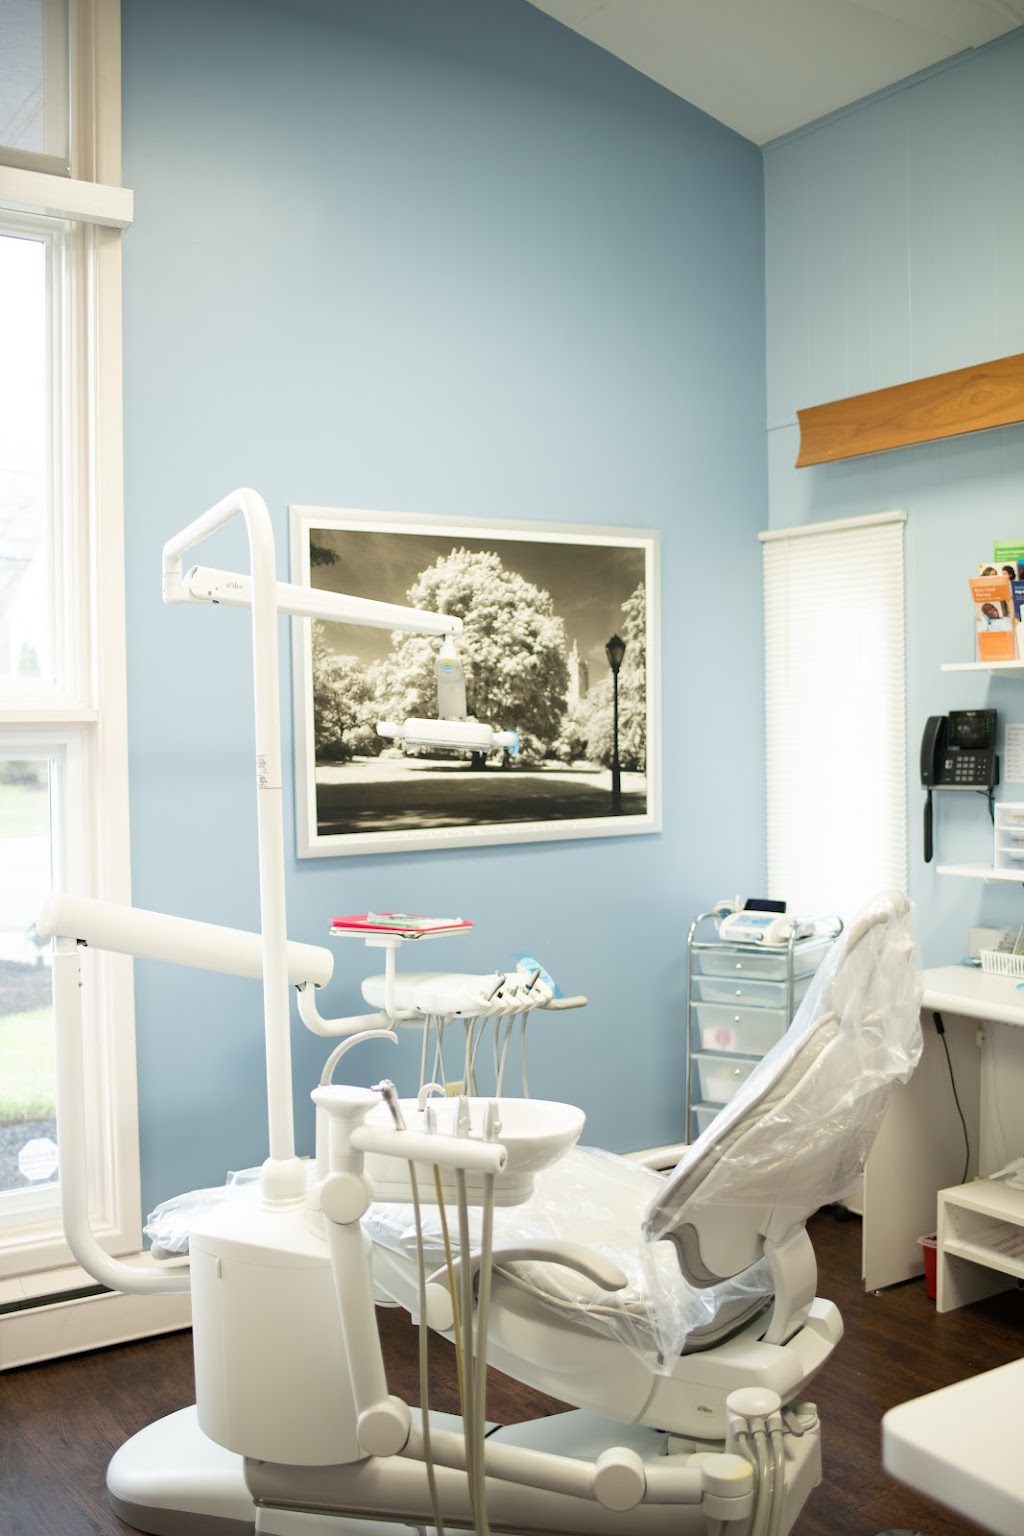 Kenney Dental | 431 Haines Mill Rd #5940, Allentown, PA 18104 | Phone: (610) 432-1228